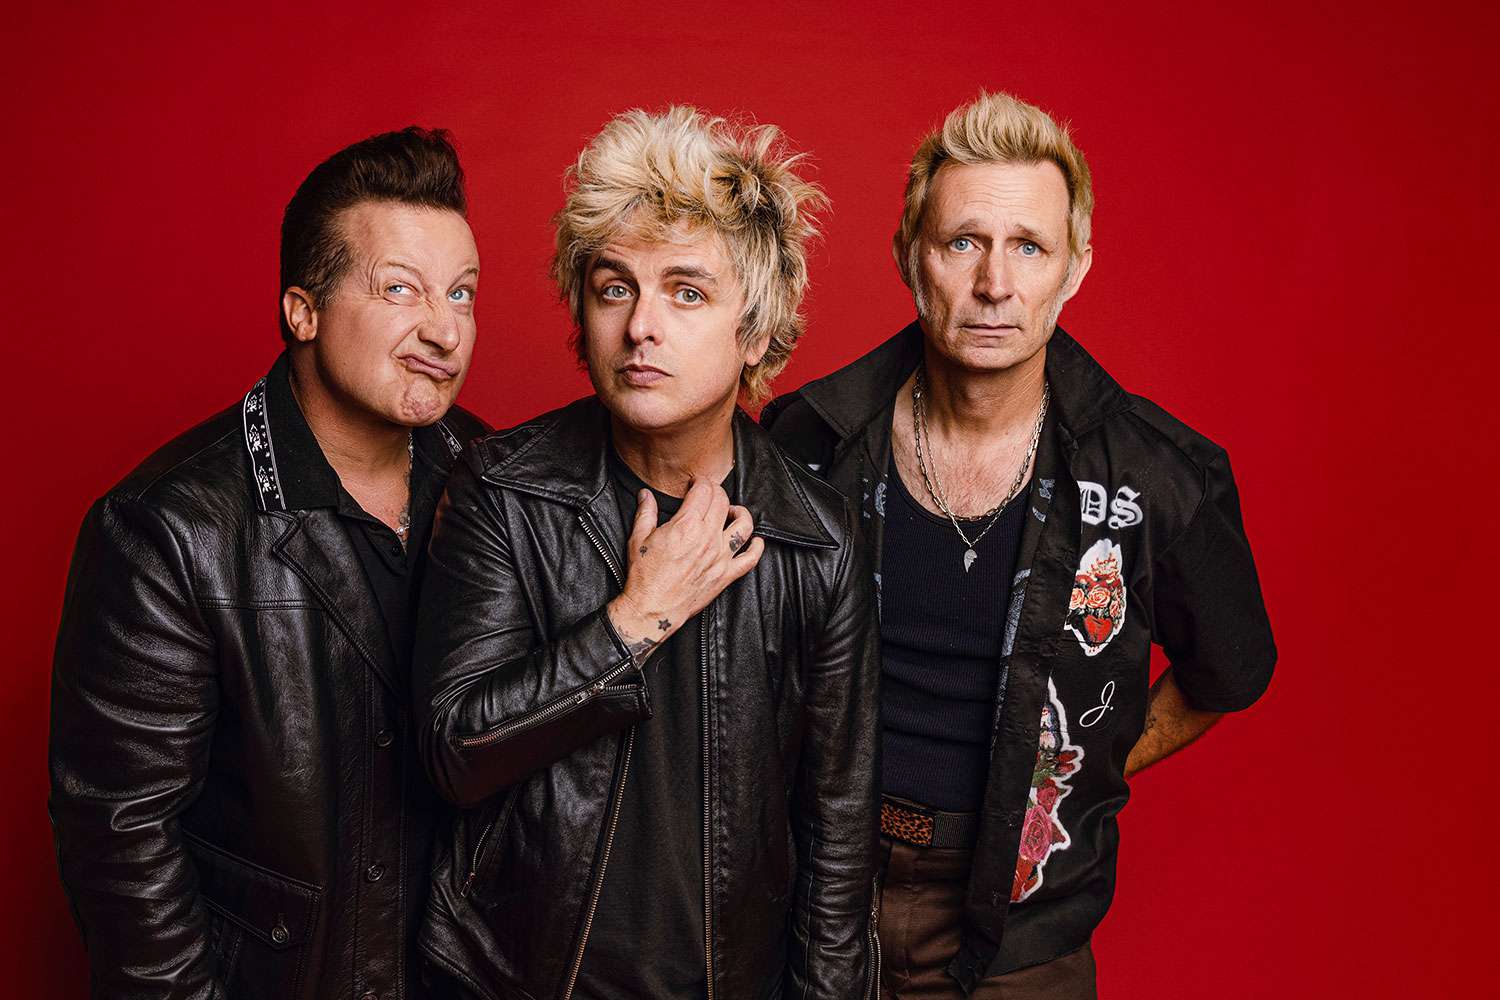 Green Day: From Punk Rock Pioneers to Global Superstars